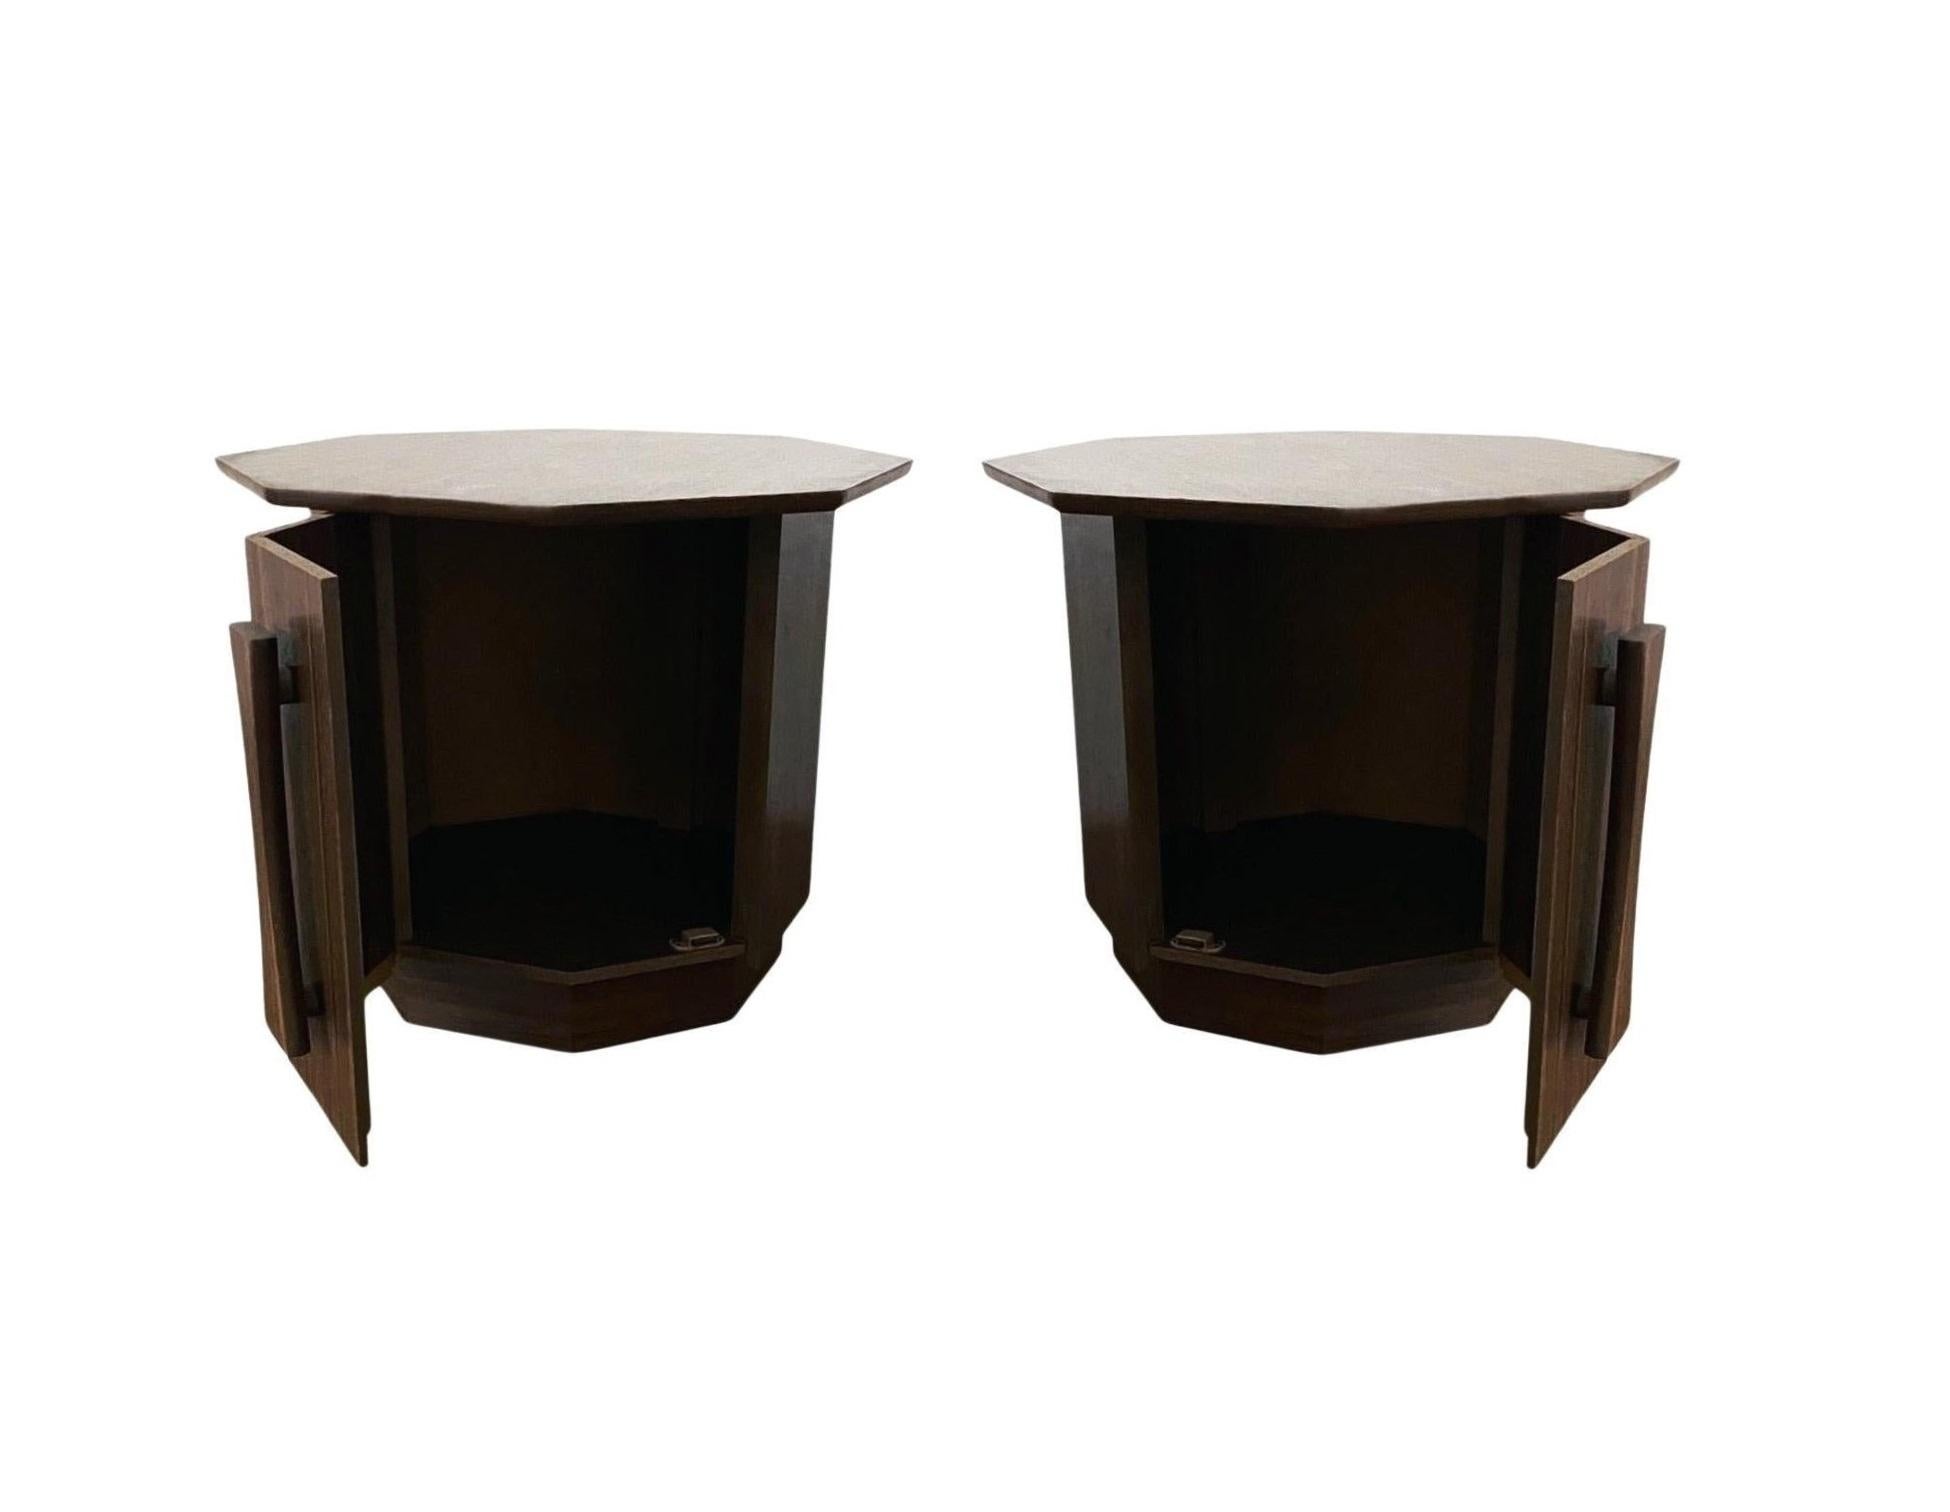 Laminated Pair of Brutalist Octagonal Cabinets / Bedside Tables, c. 1960's For Sale